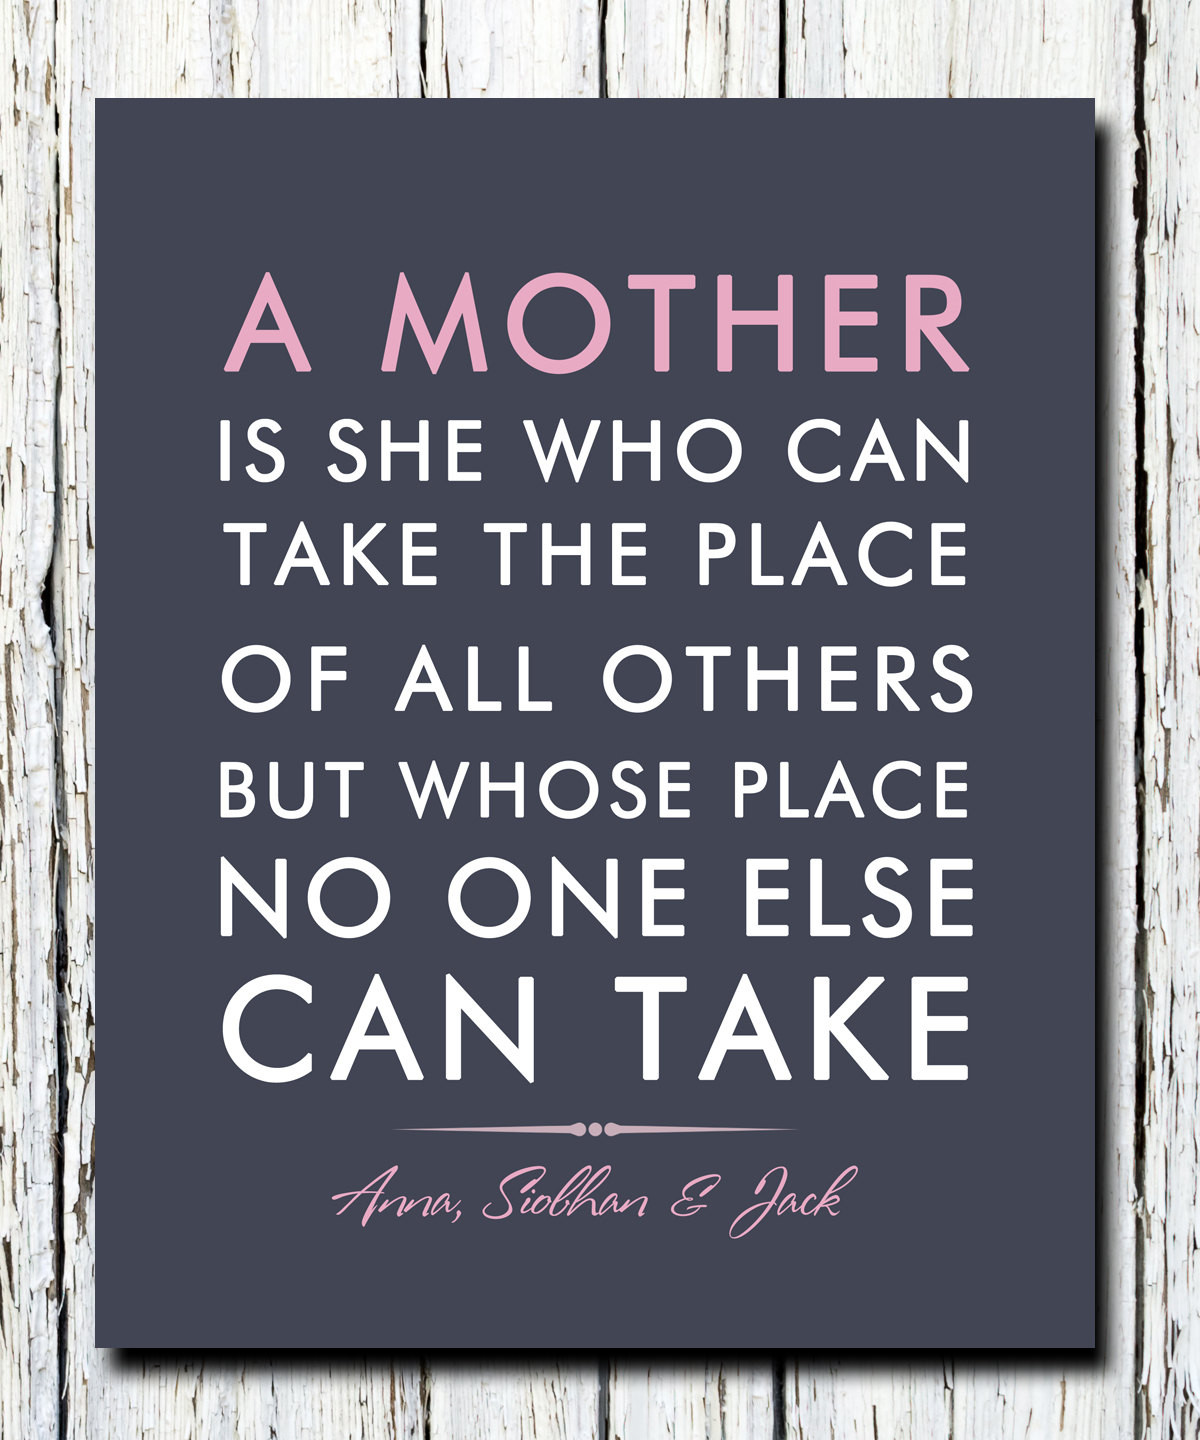 Amazing Mother Quotes
 Quotes about Amazing mothers 52 quotes